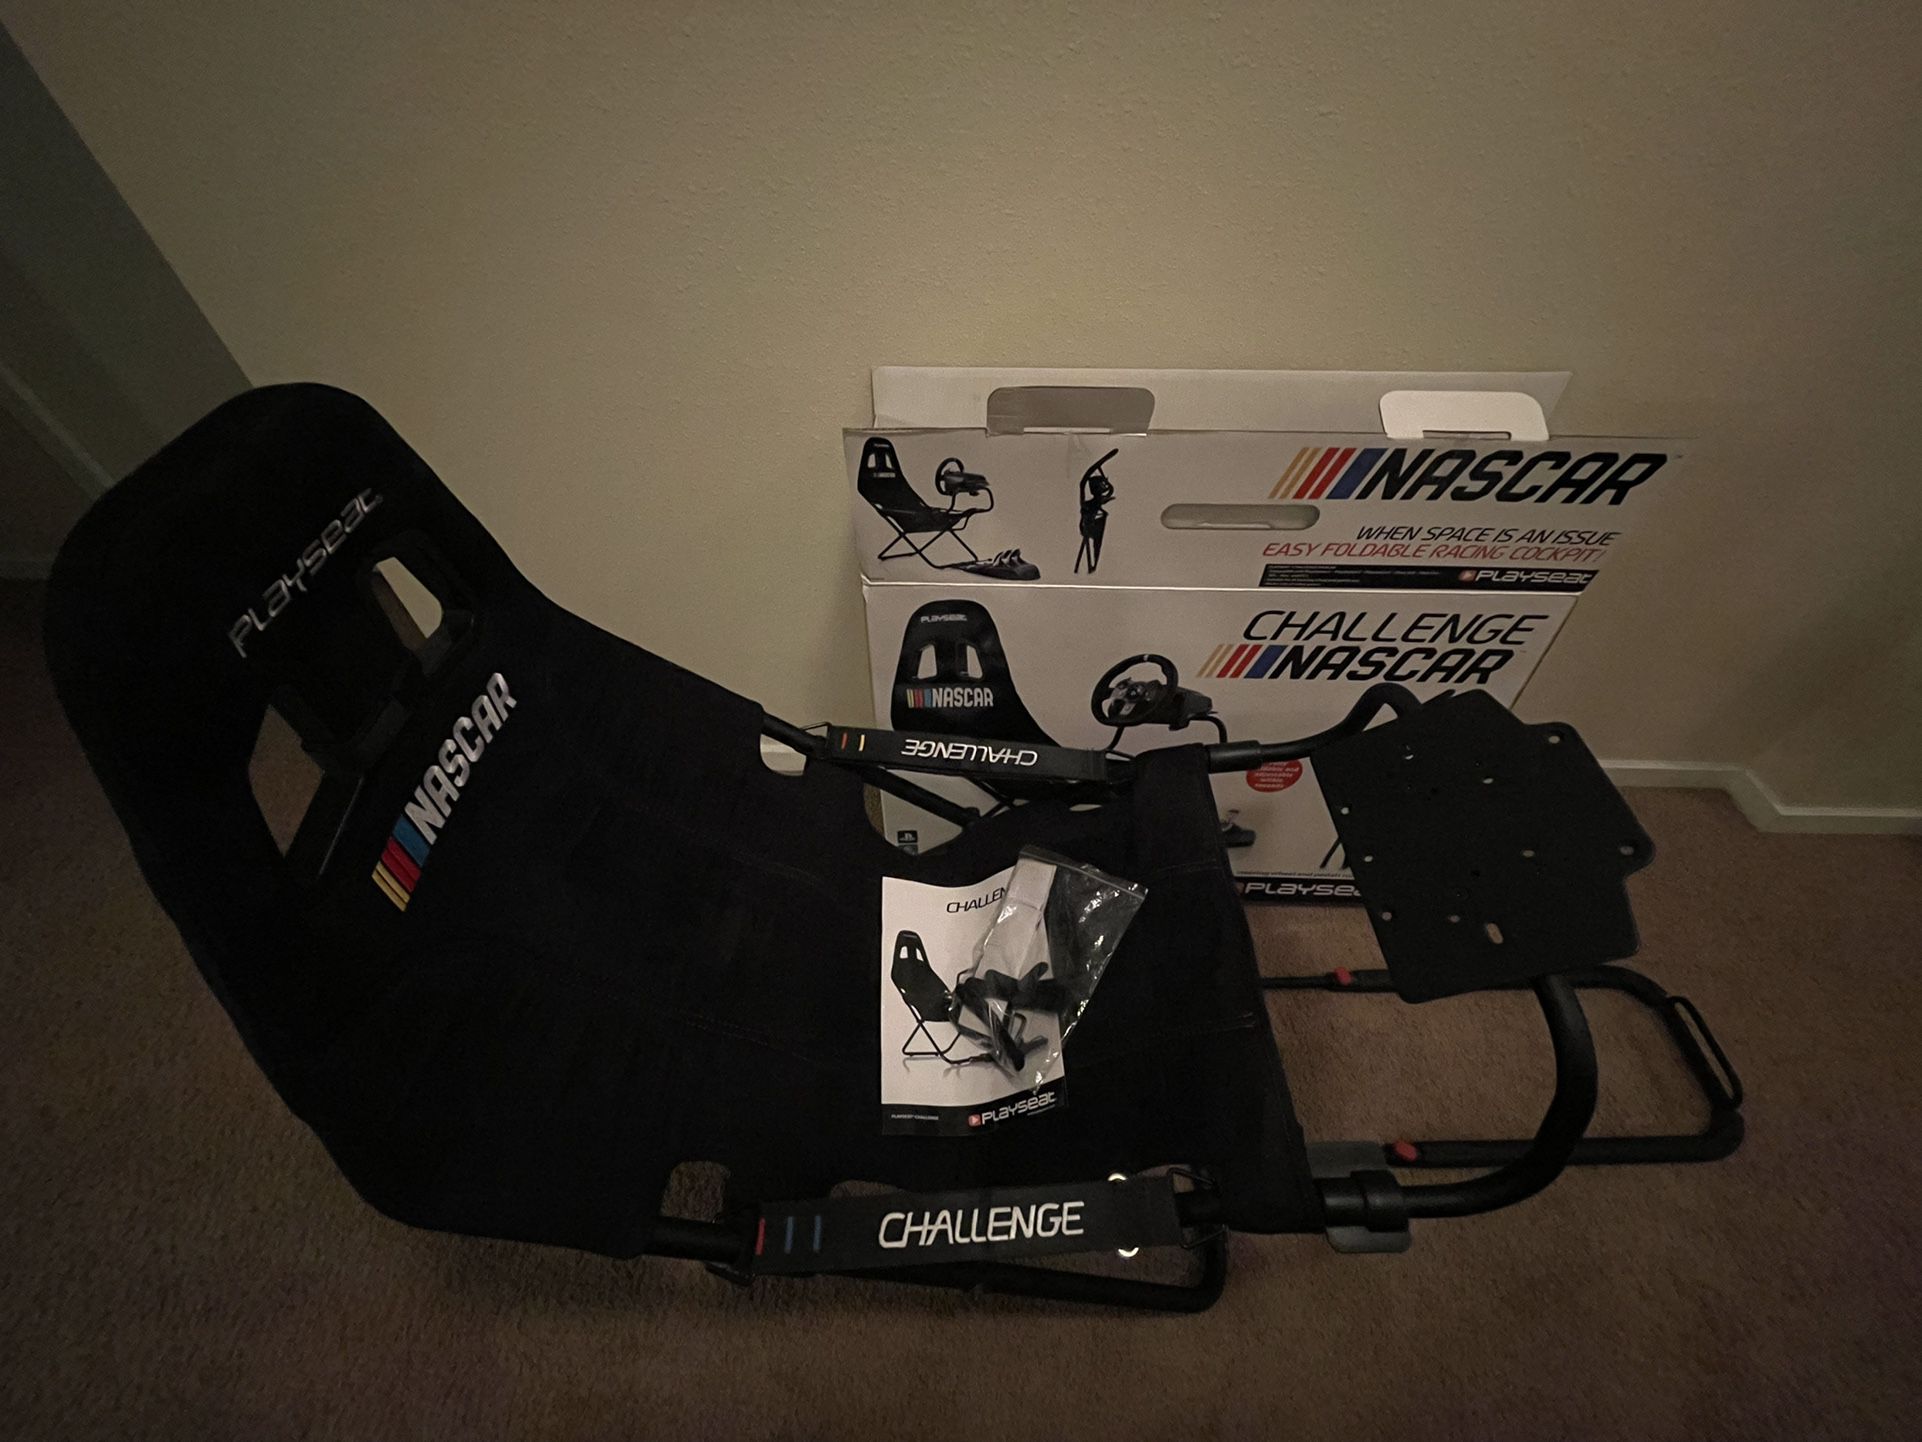 Playseat Challenge NASCAR Edition Racing Video Game Chair